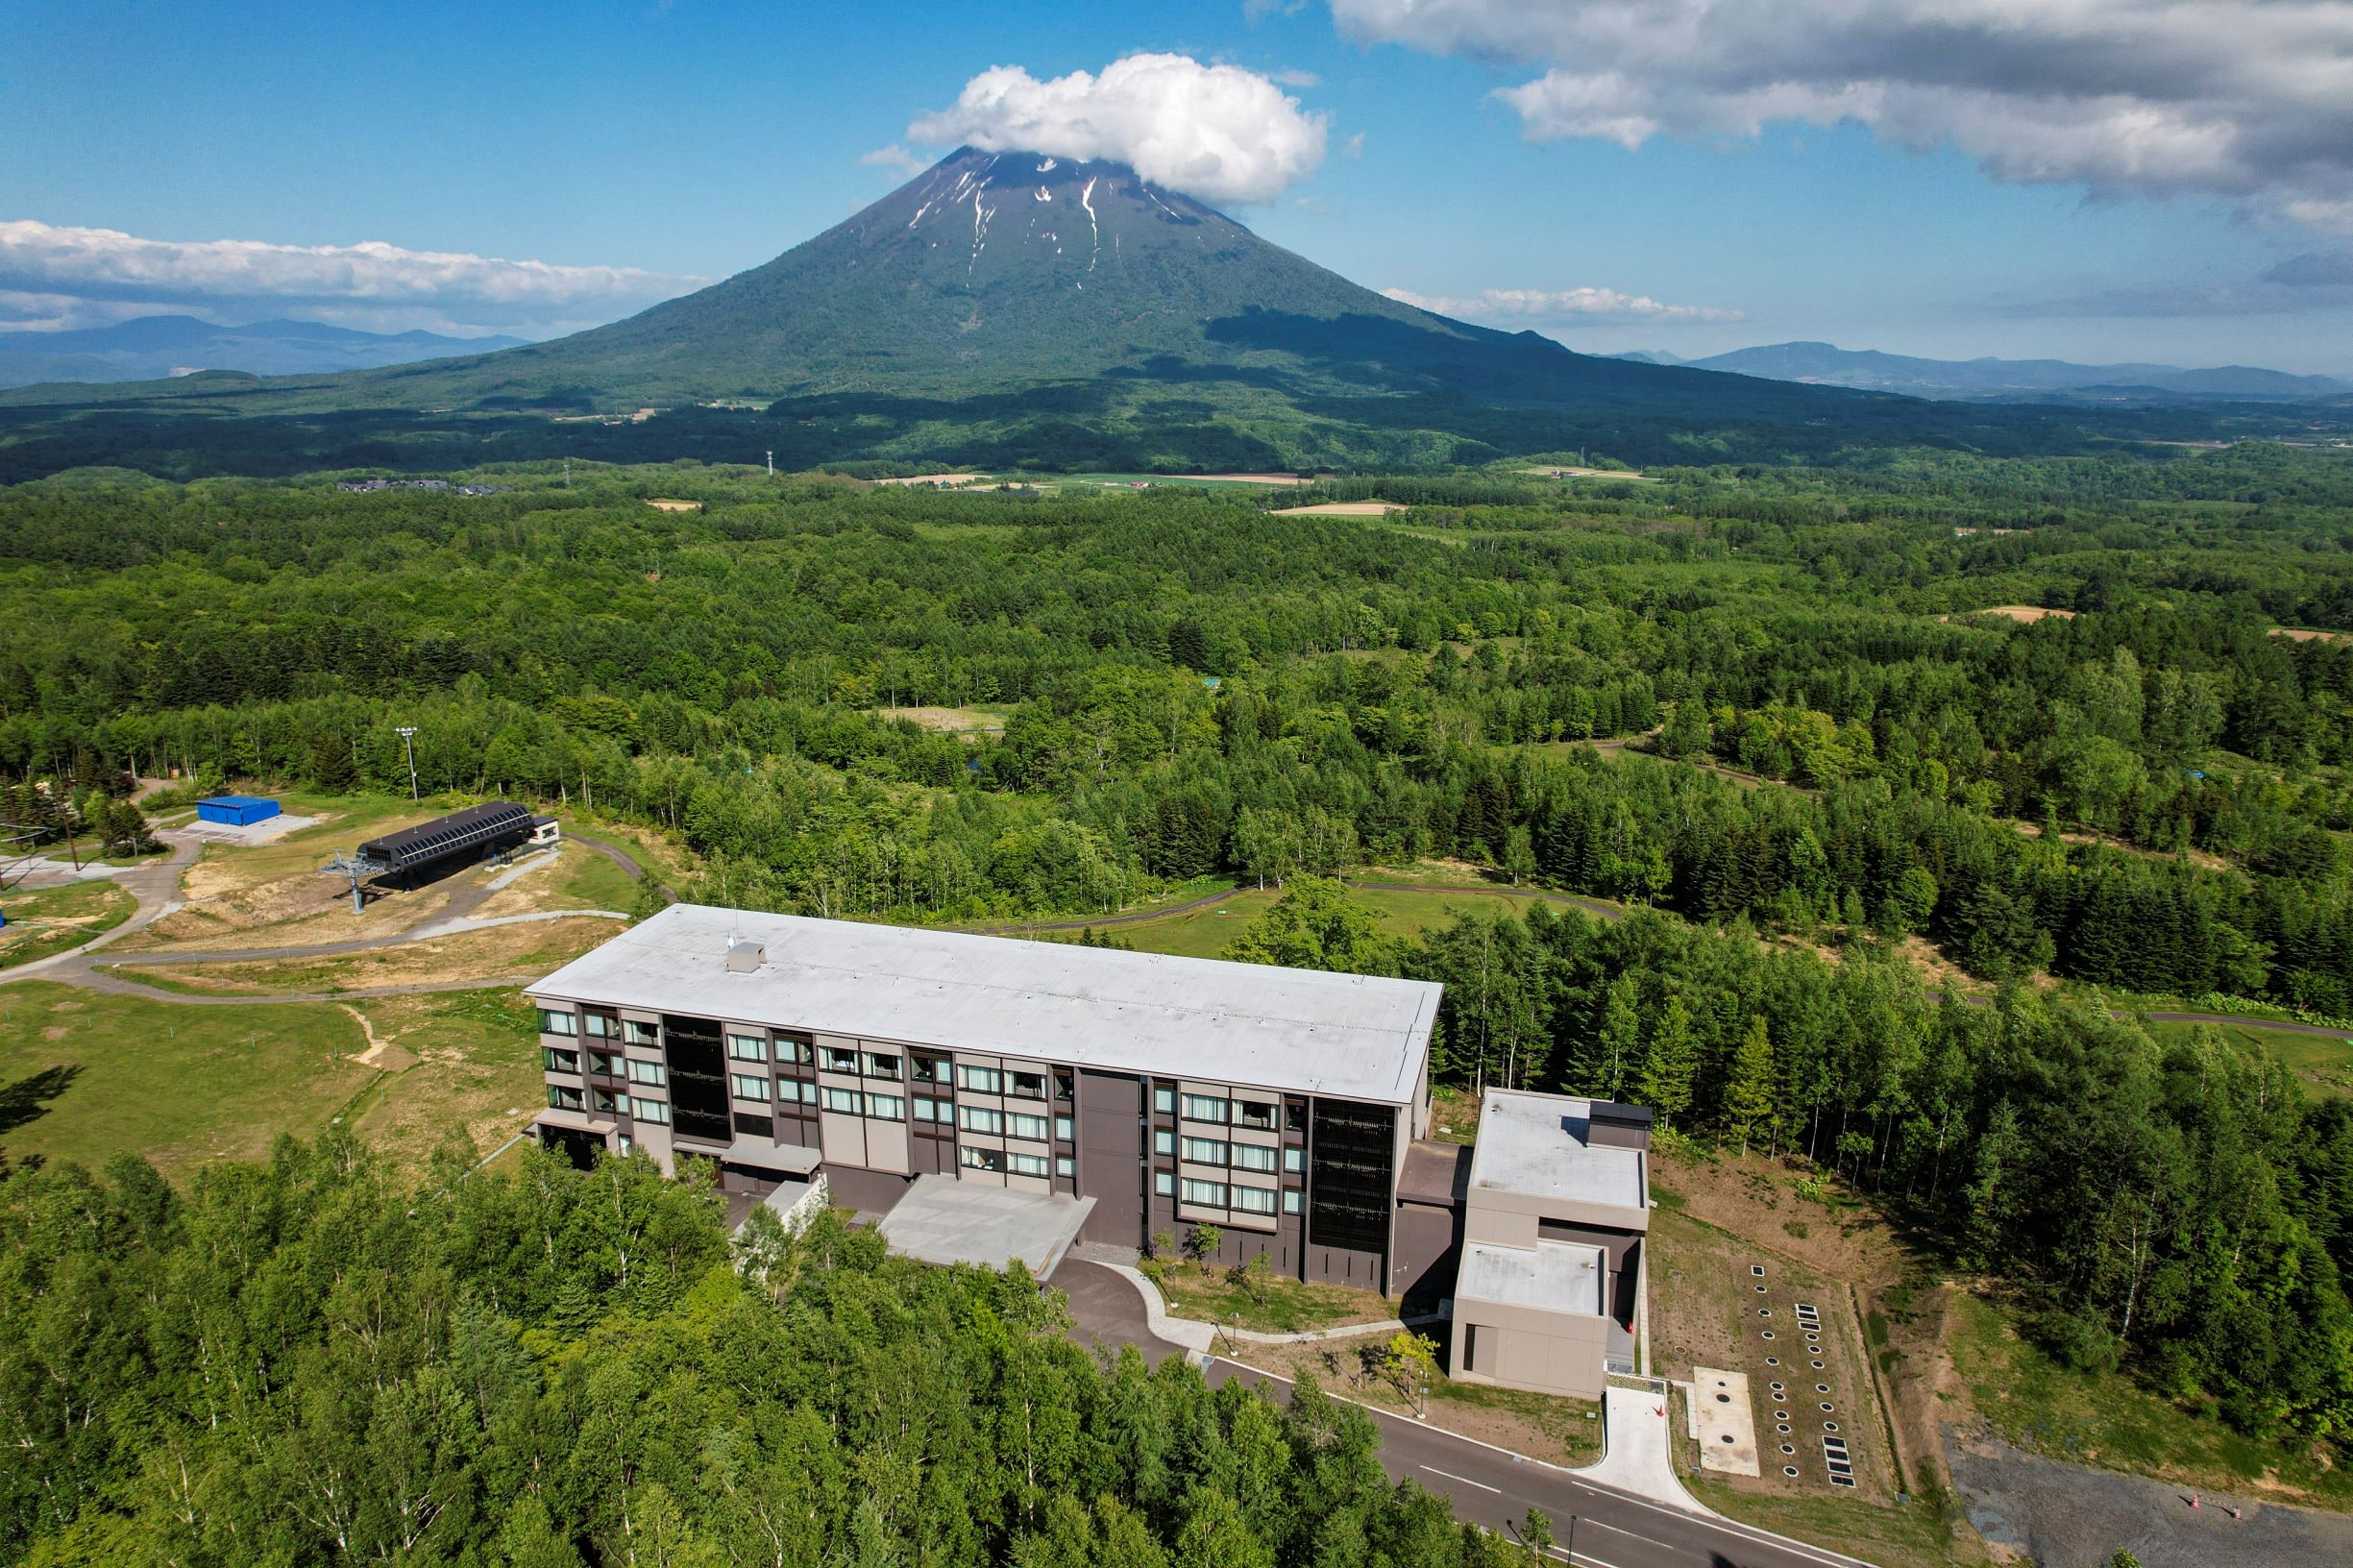 You can enjoy the magnificent scenery of Mt. Yotei, also known as "Ezo Fuji", and Niseko Annupuri.